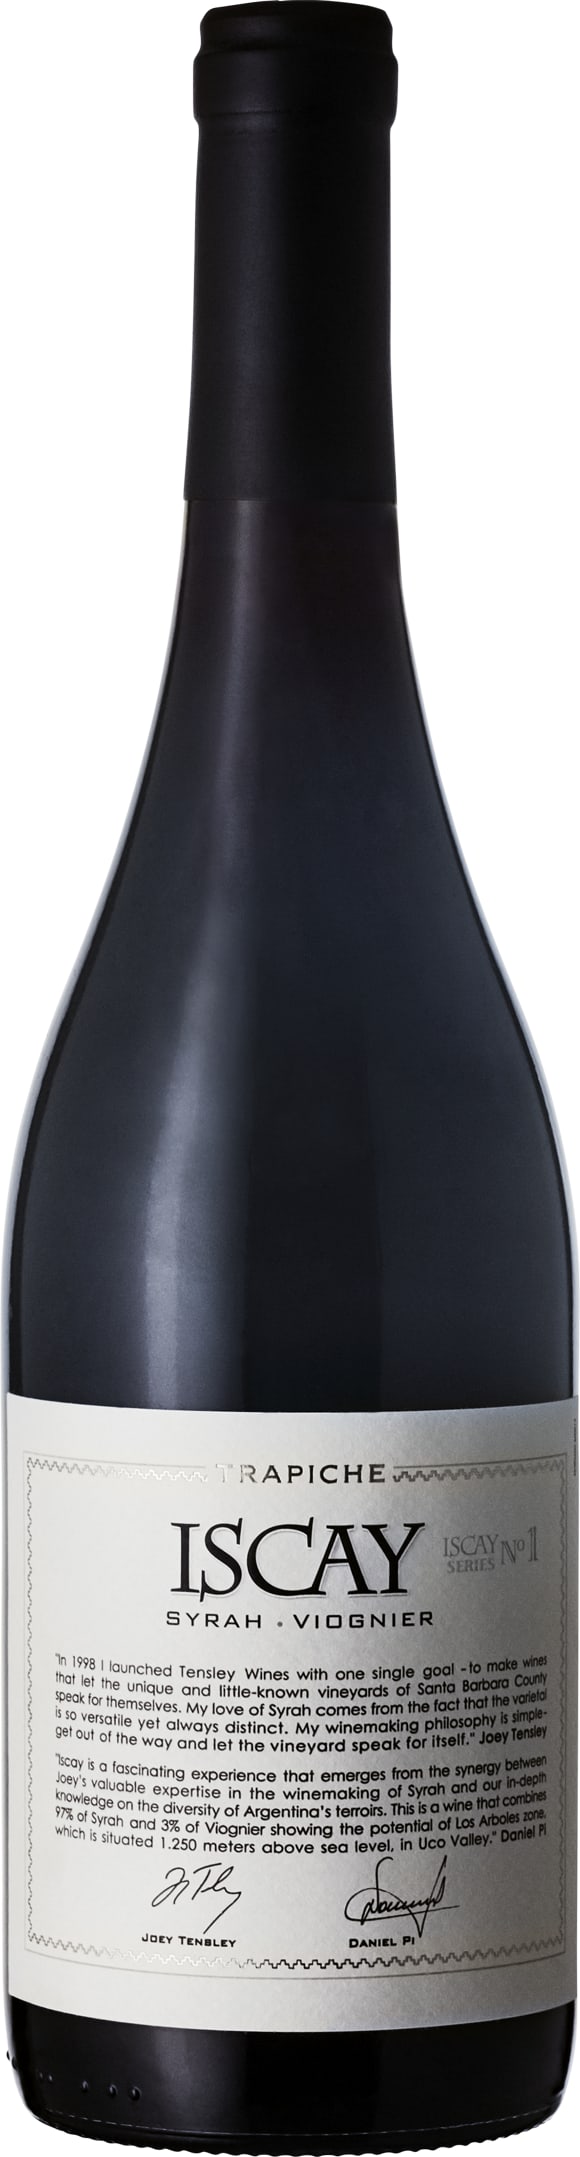 Trapiche Iscay Syrah Viognier 2019 75cl - Buy Trapiche Wines from GREAT WINES DIRECT wine shop